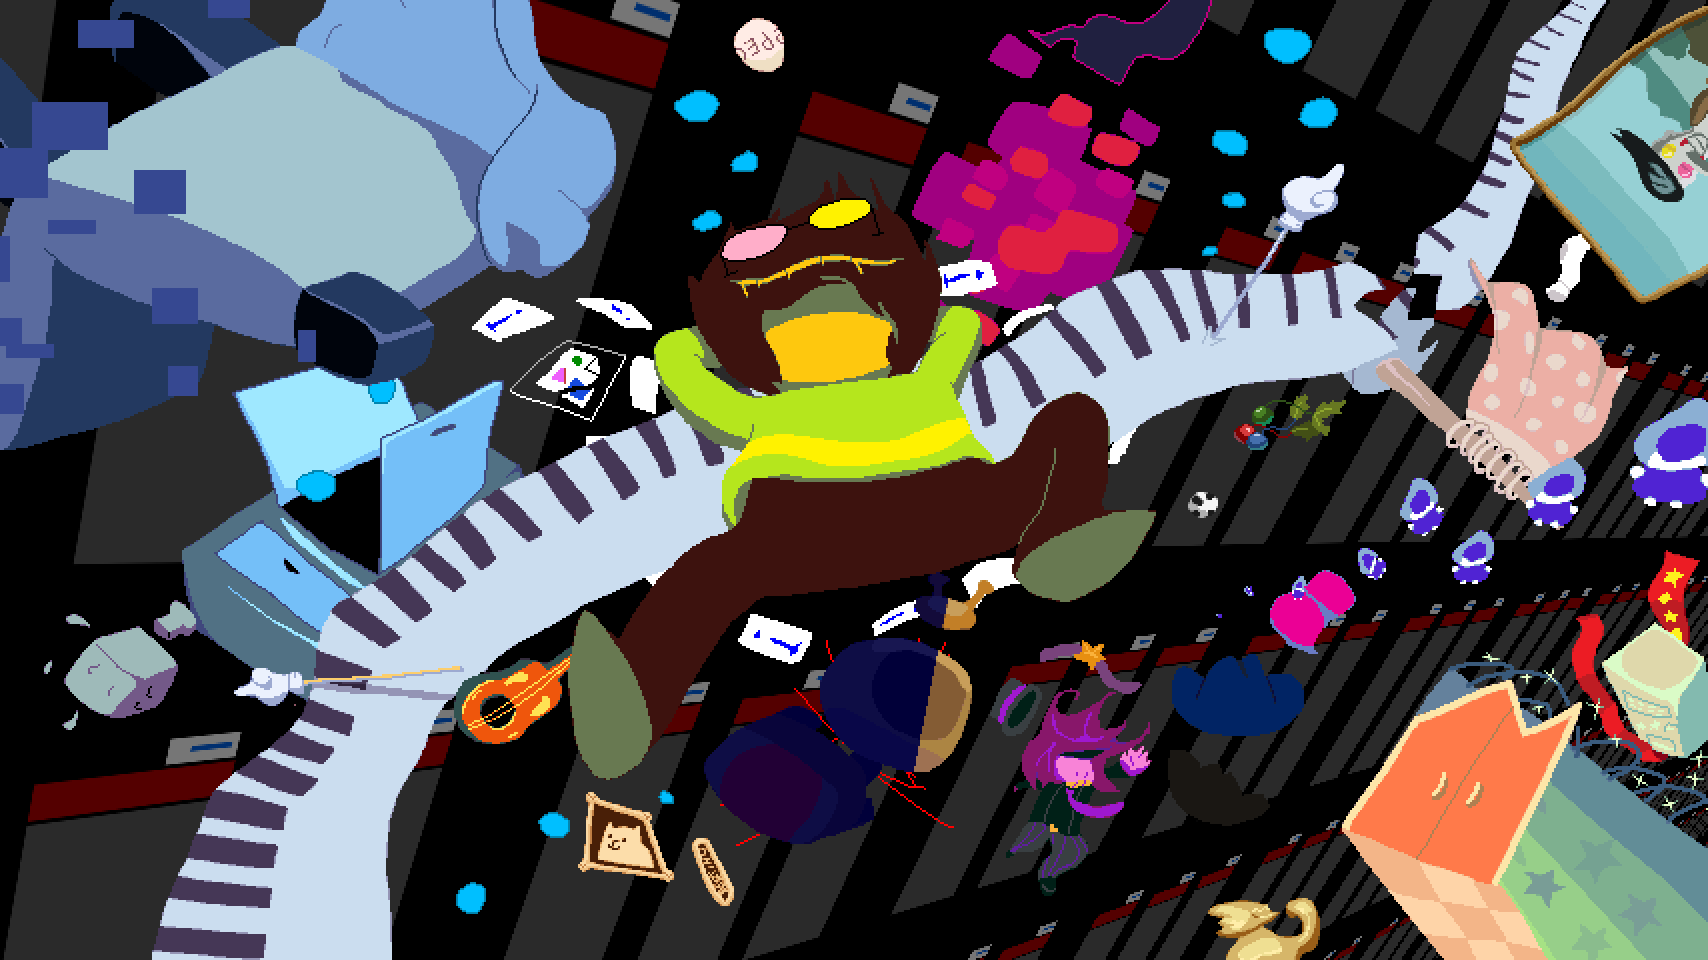 A mural-like pixel art piece depicting several characters from Deltarune and references to the Spamton Sweepstakes event.